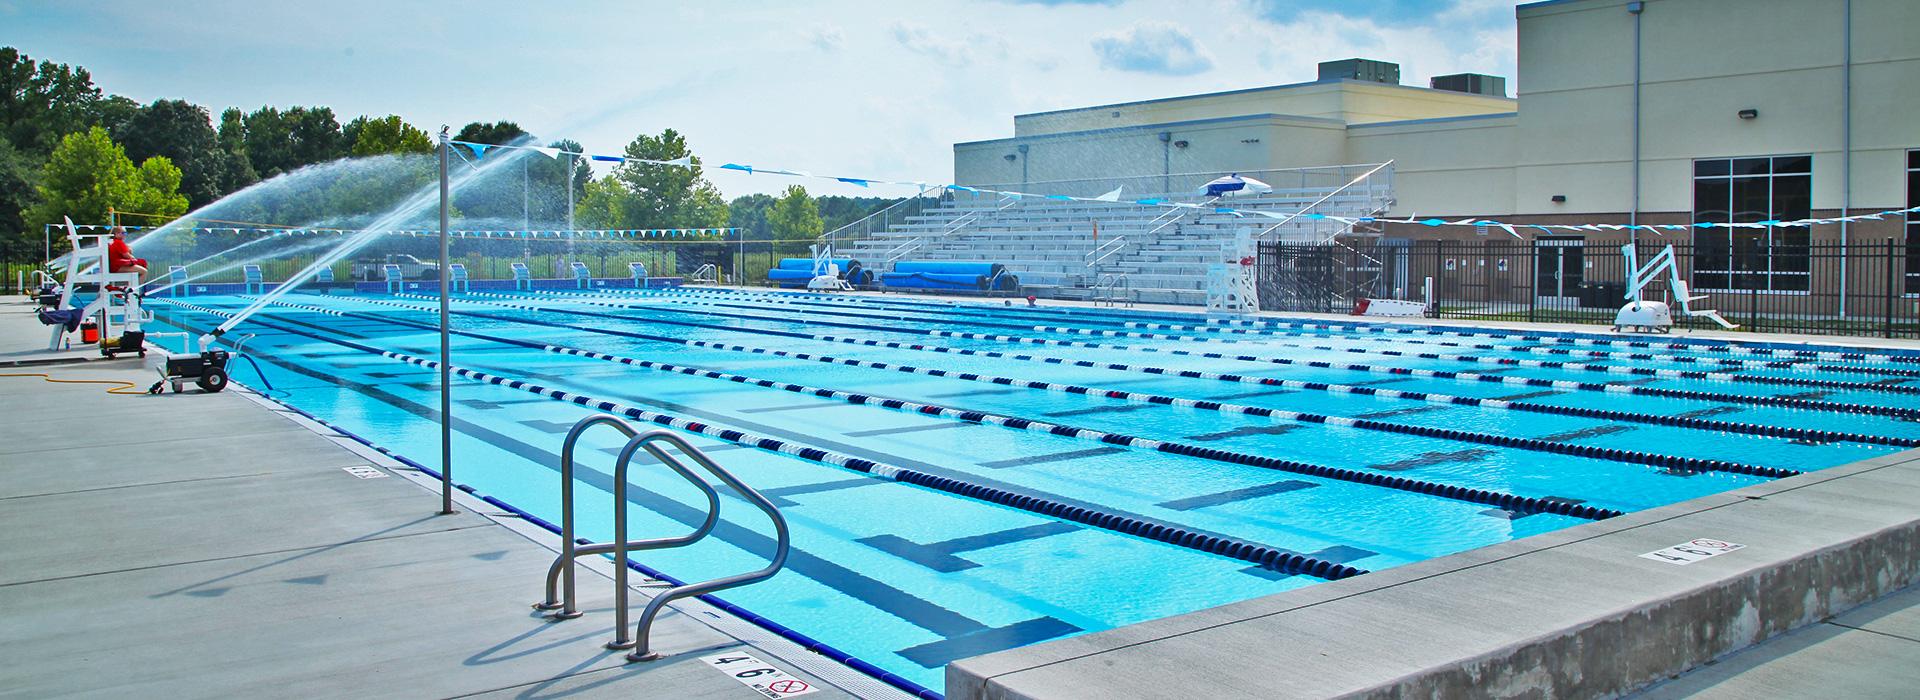 50-meter outdoor lap pool at the Princess Anne Family YMCA